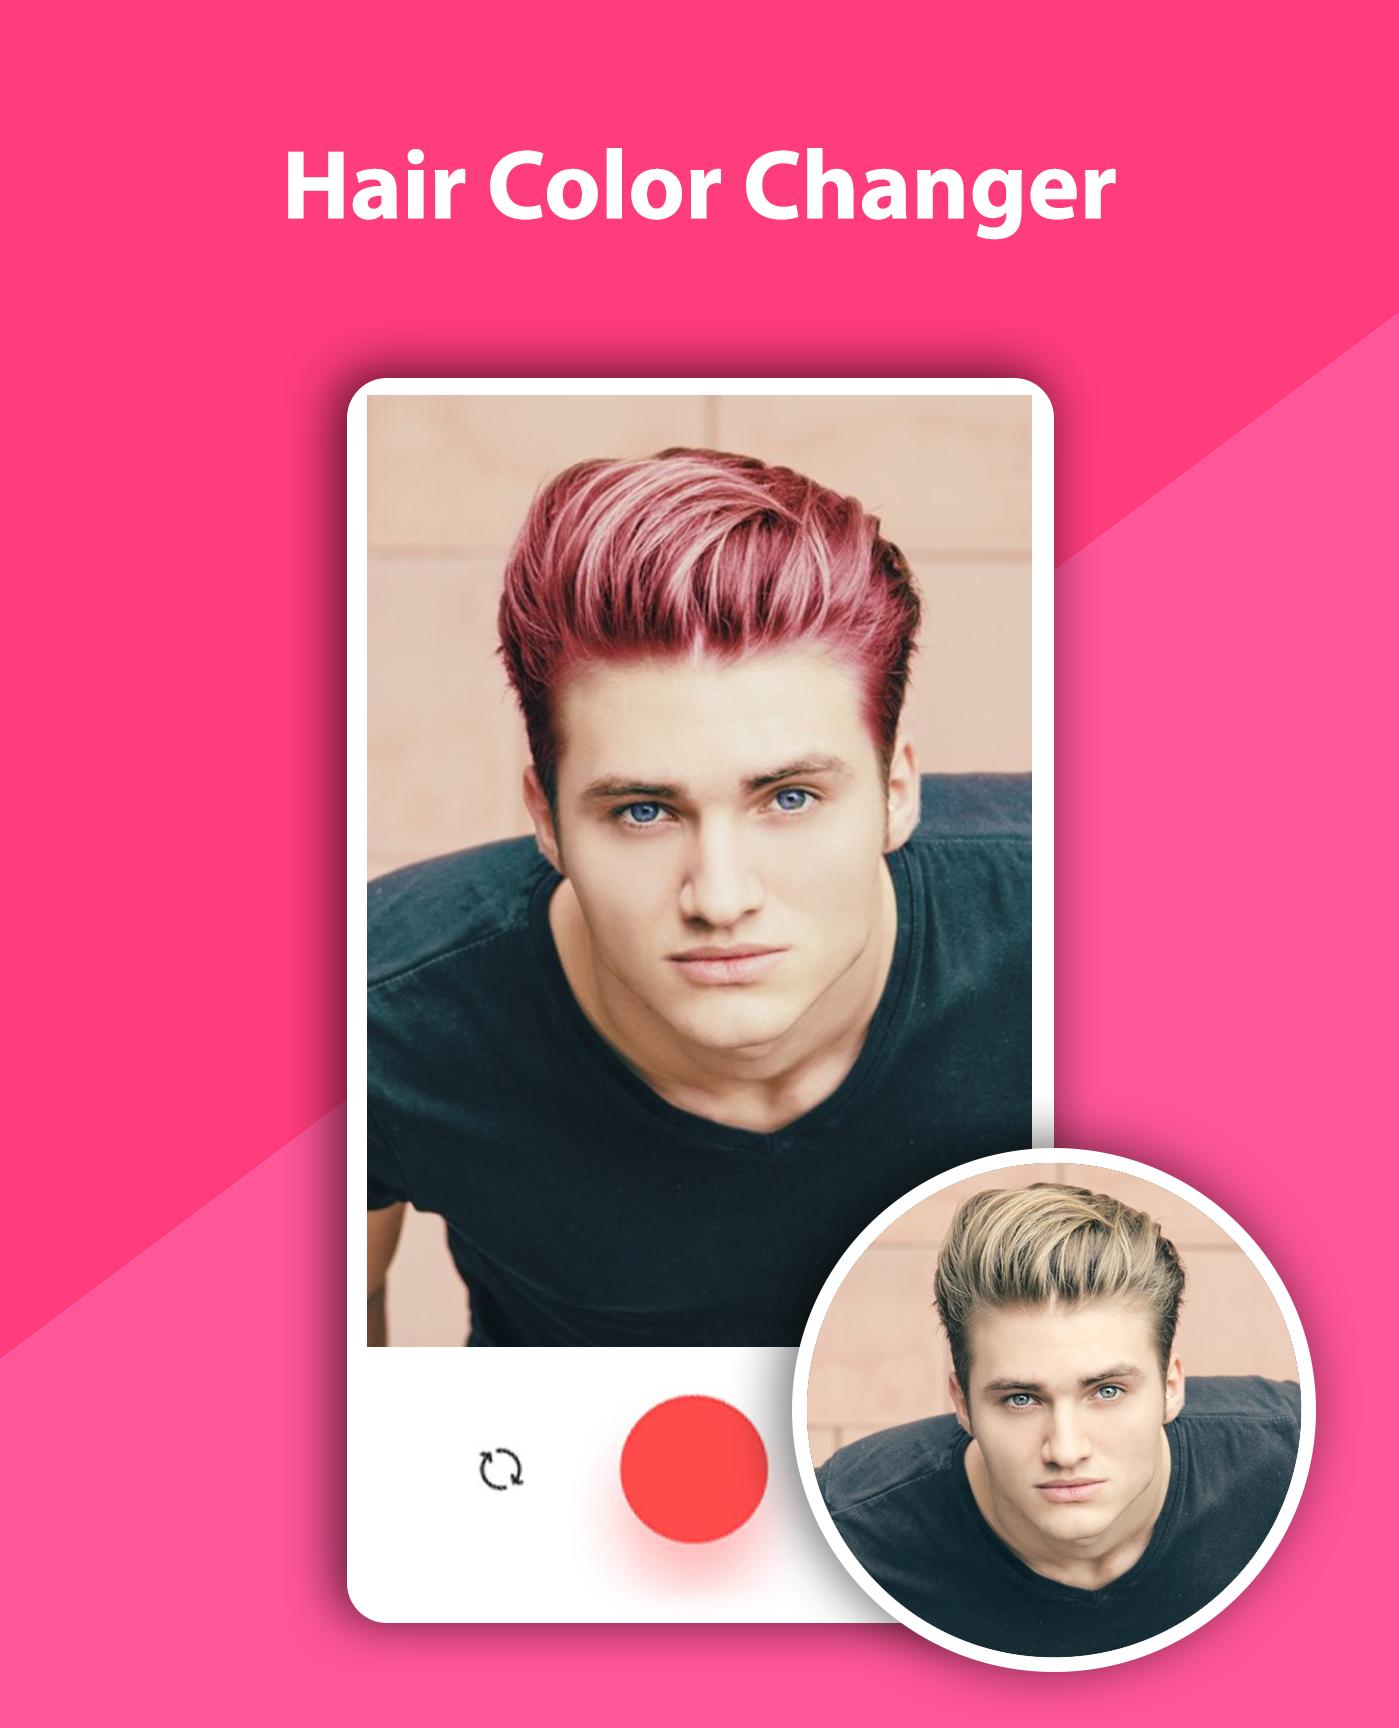 Hair color changer - Try different hair colors 1.0.0 Screenshot 4